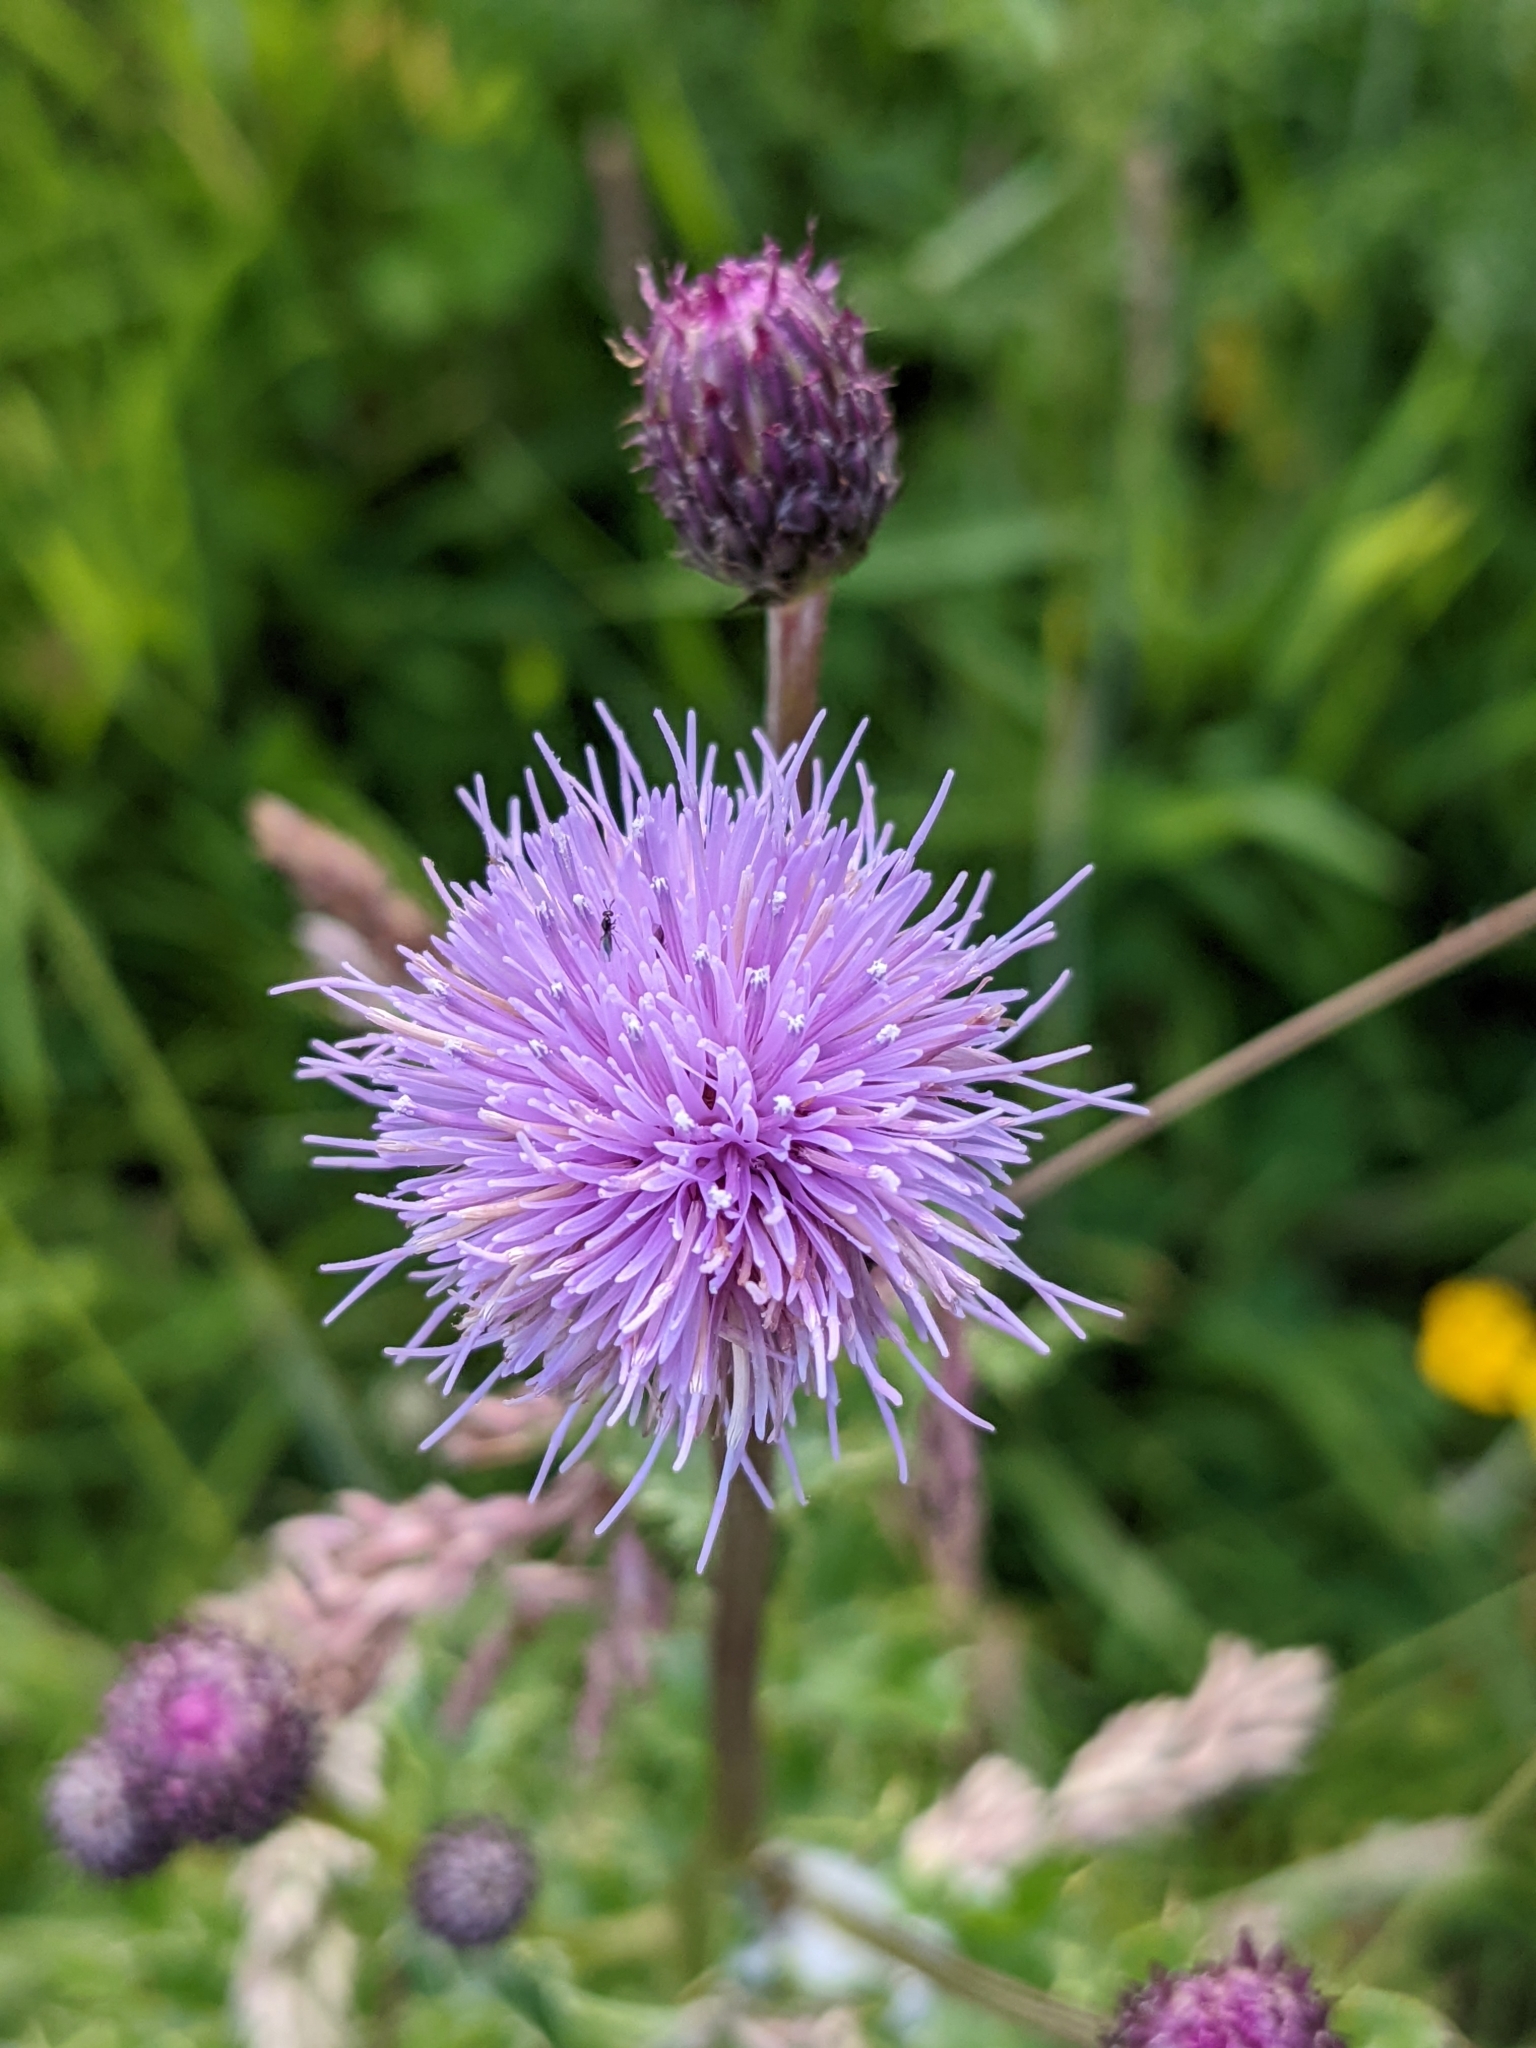 A close up of the flower of a Canada thistle with a small black insect on it. Other Canada thistle flowers can be seen in the background